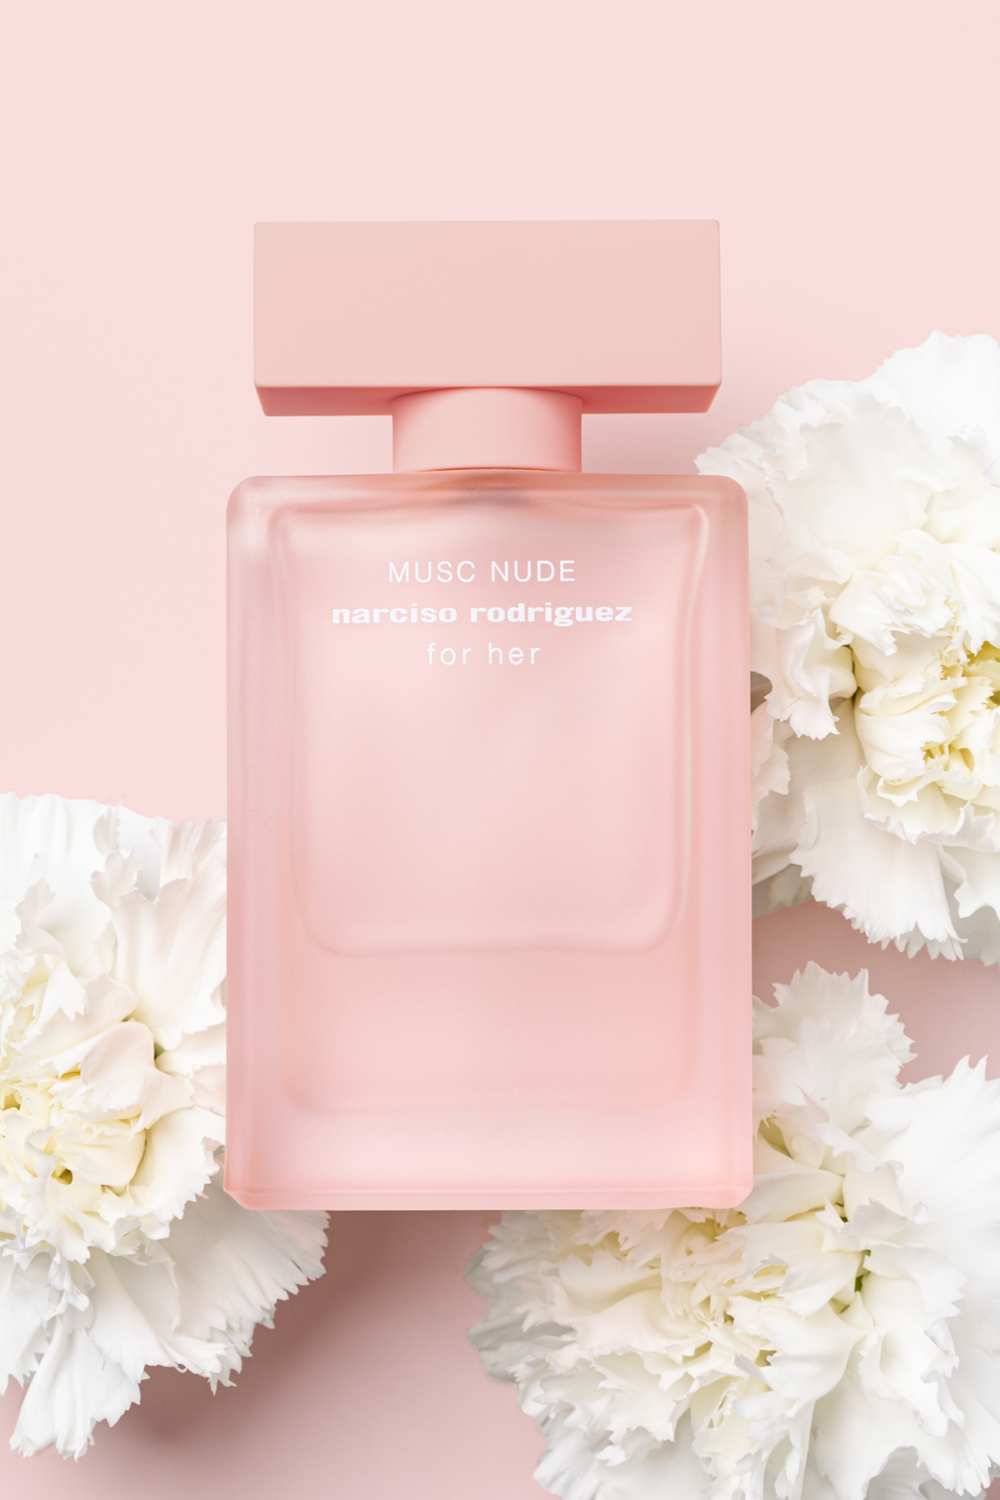 narciso rodriguez musc nude parfume with flowers | Photo by fonnesbo